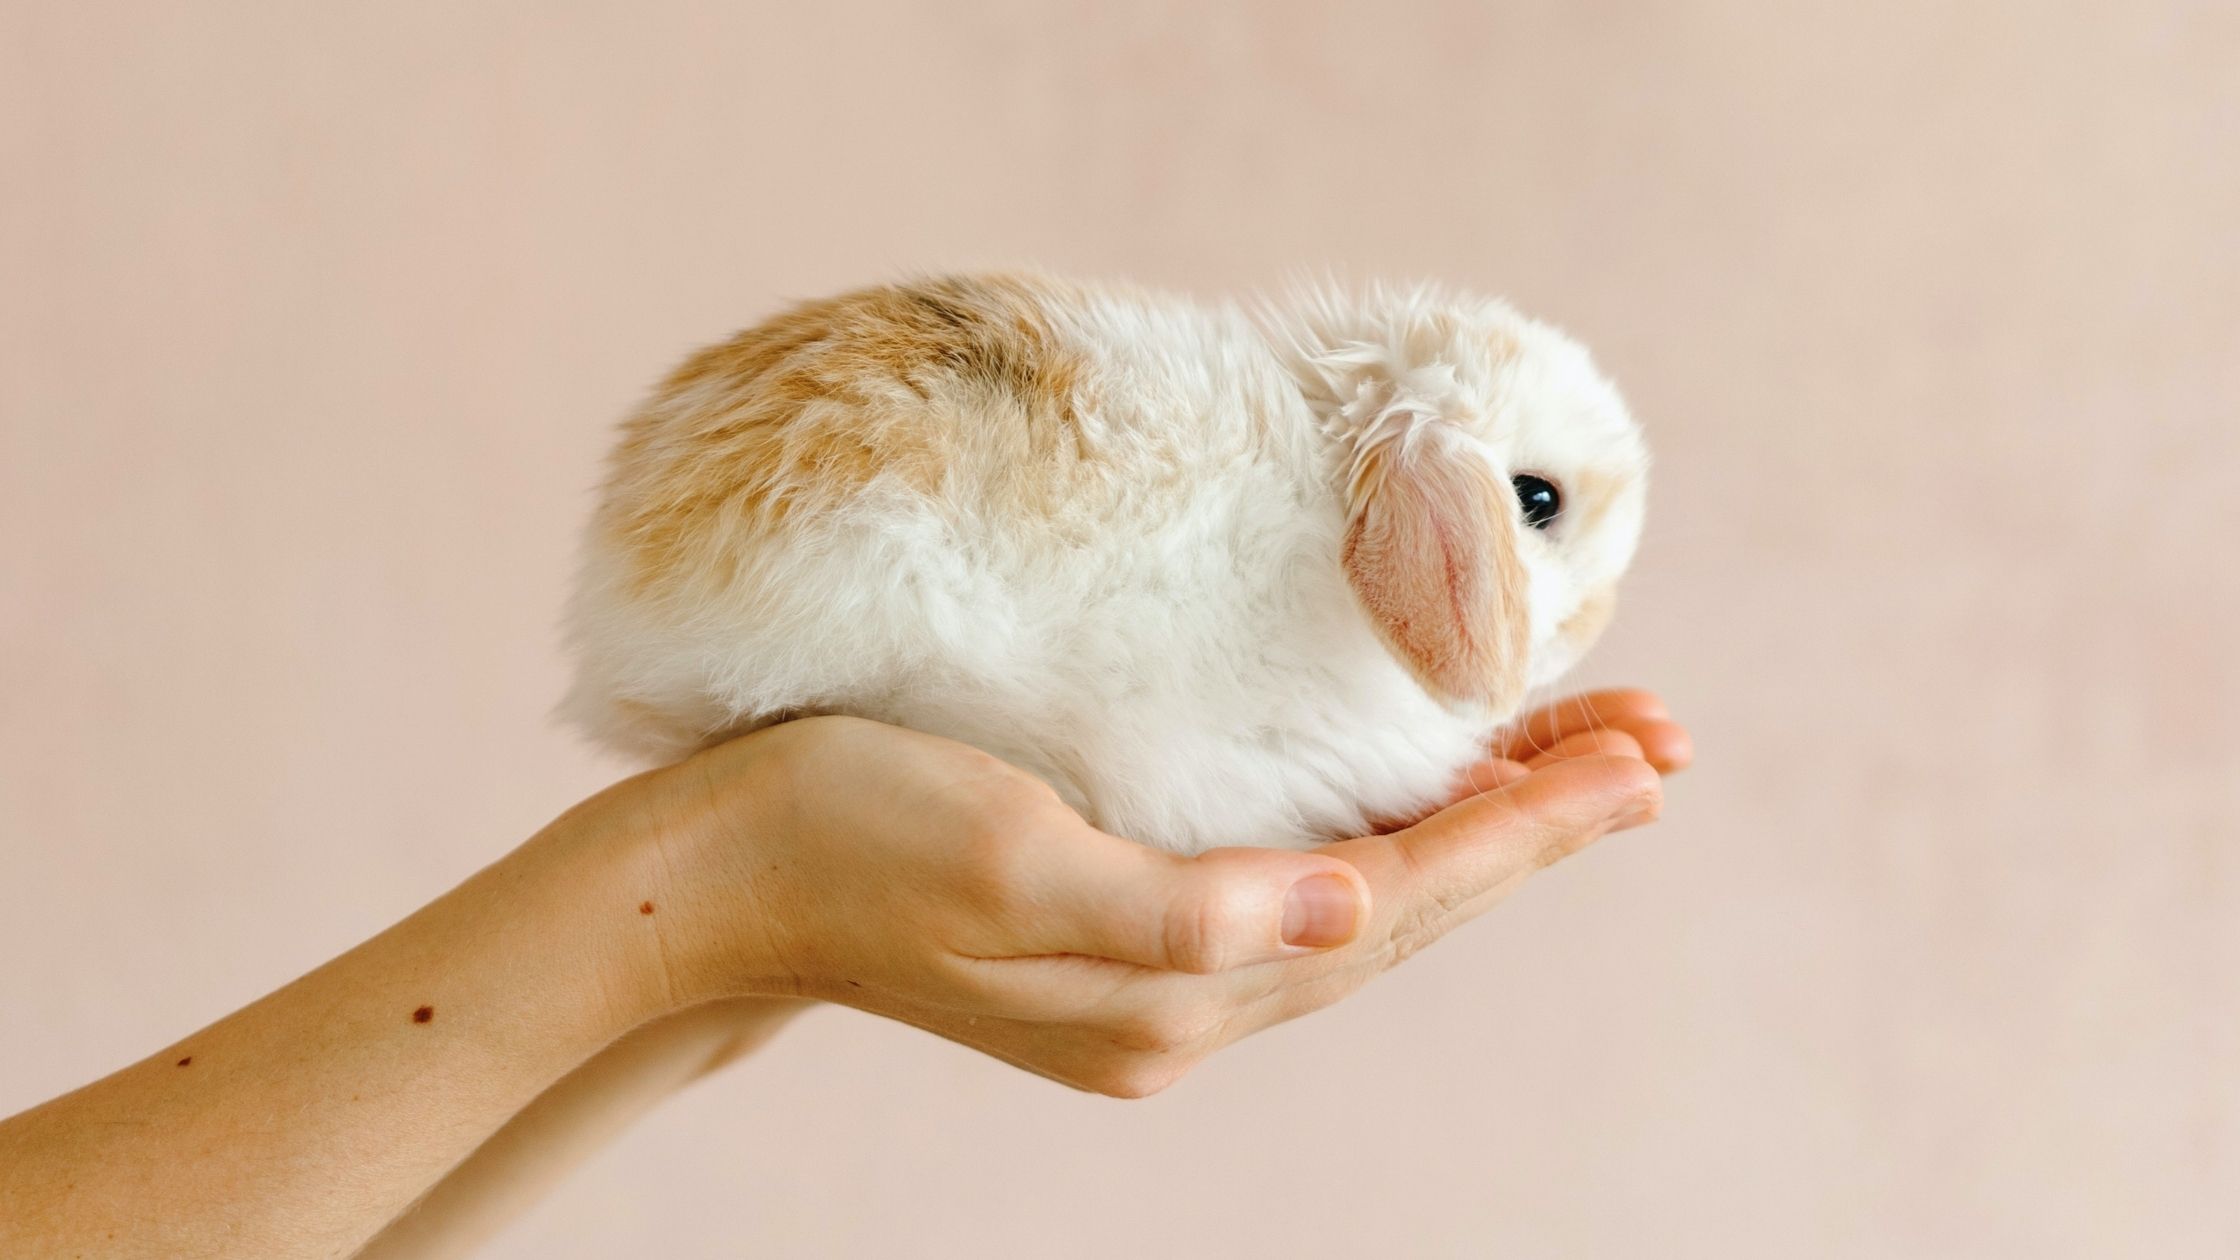 Person holding baby rabbit in their hands